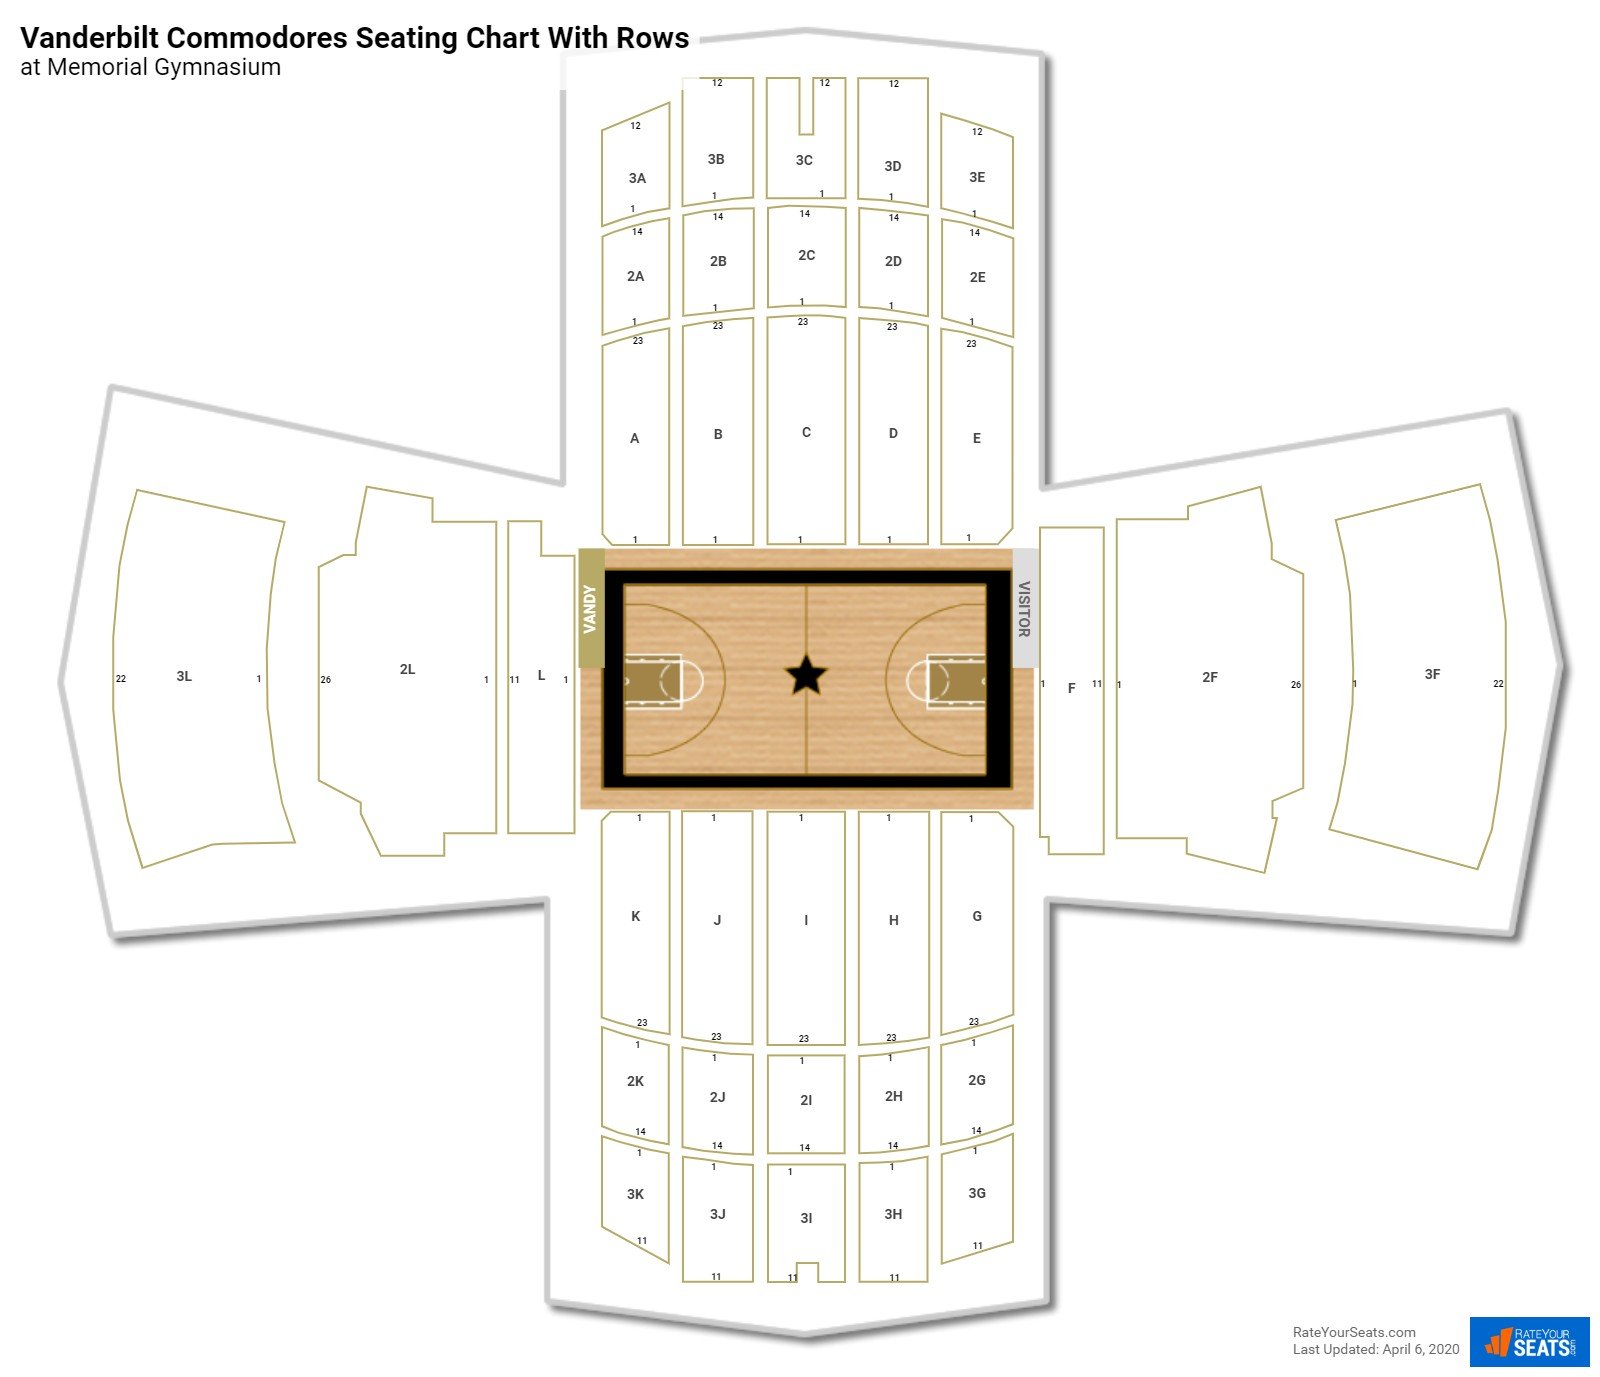 Memorial Gymnasium seating chart with row numbers